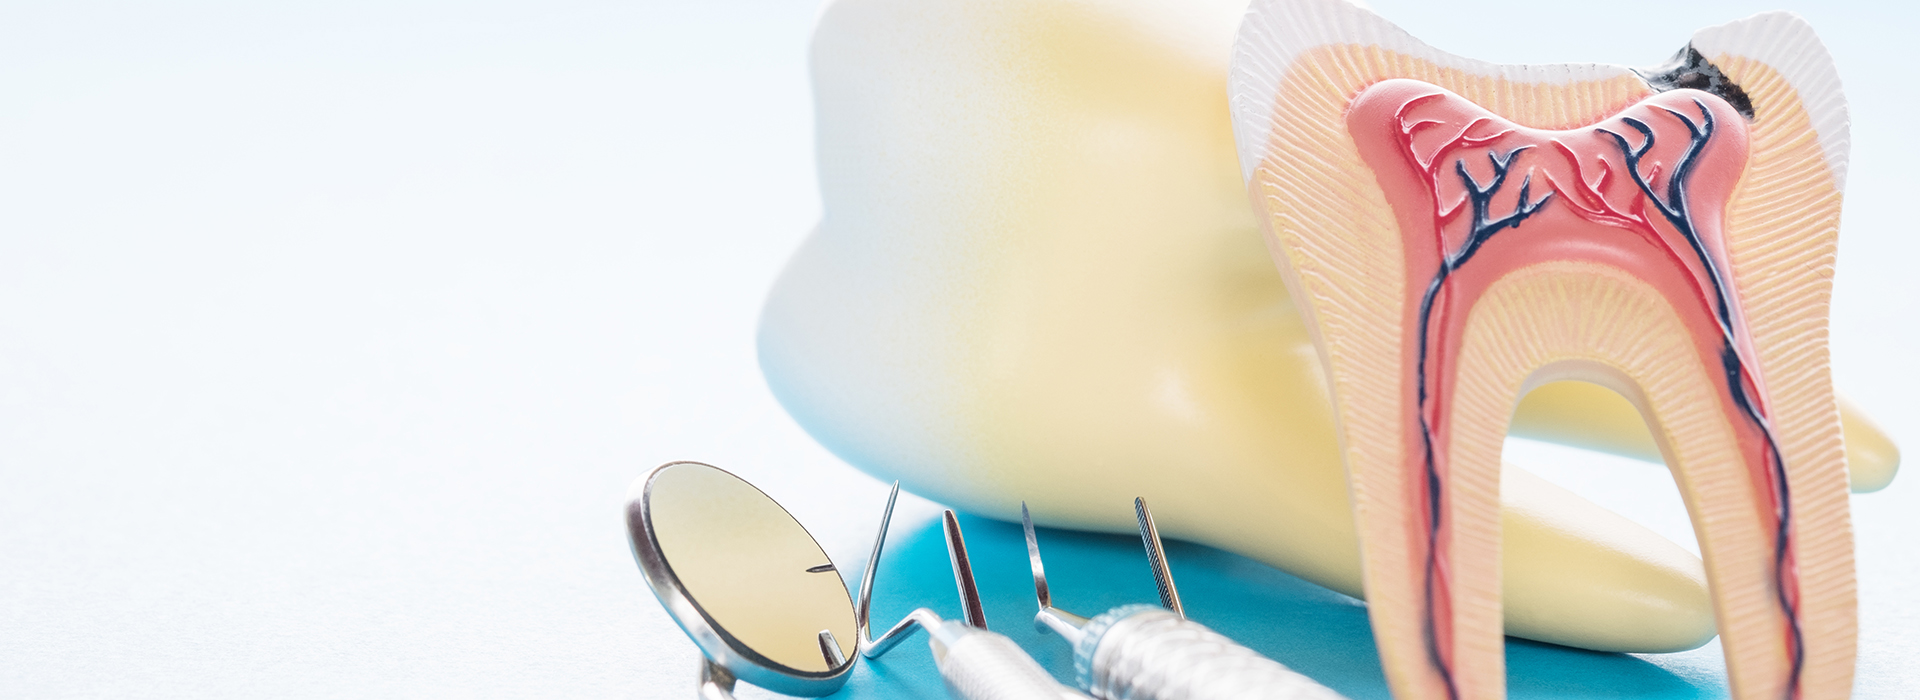 Root Canal Therapy in Glen Cove